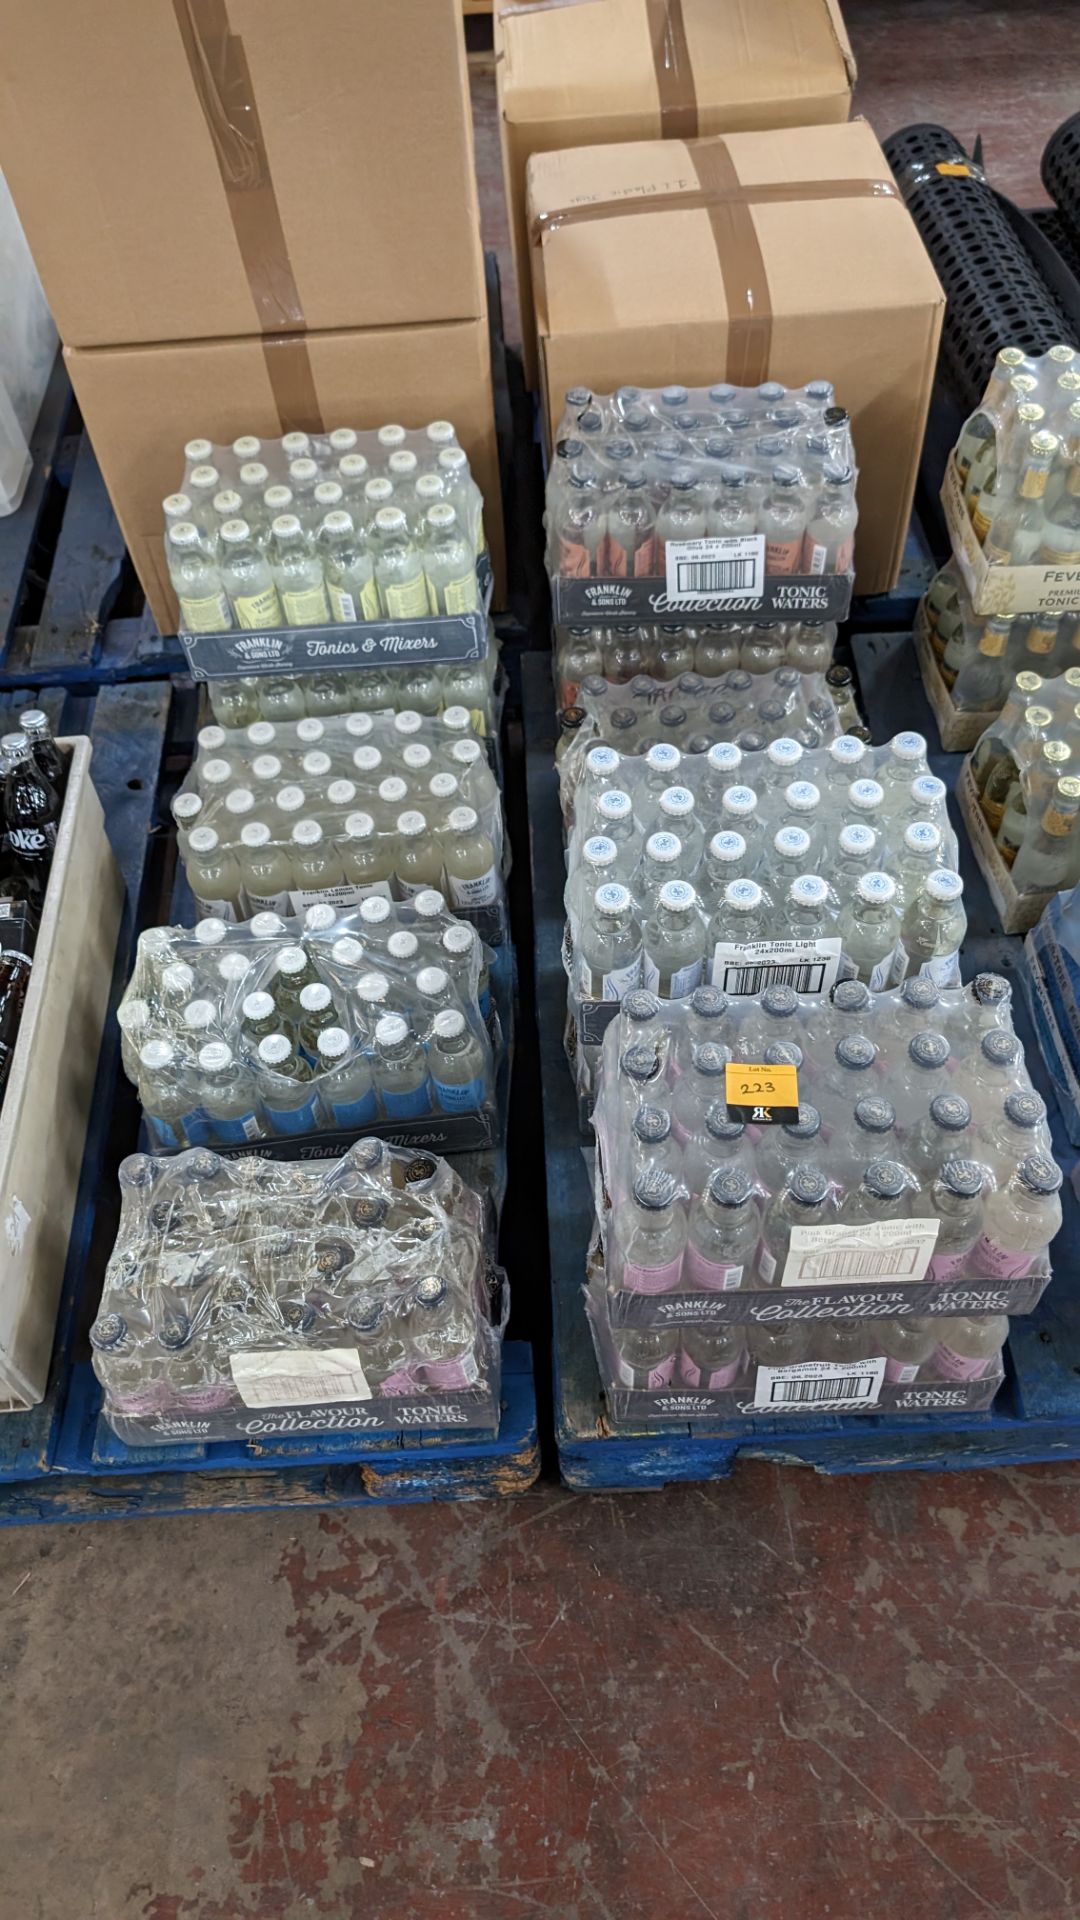 12 trays of Franklin & Sons Ltd tonics and mixers - typical best before date 2022